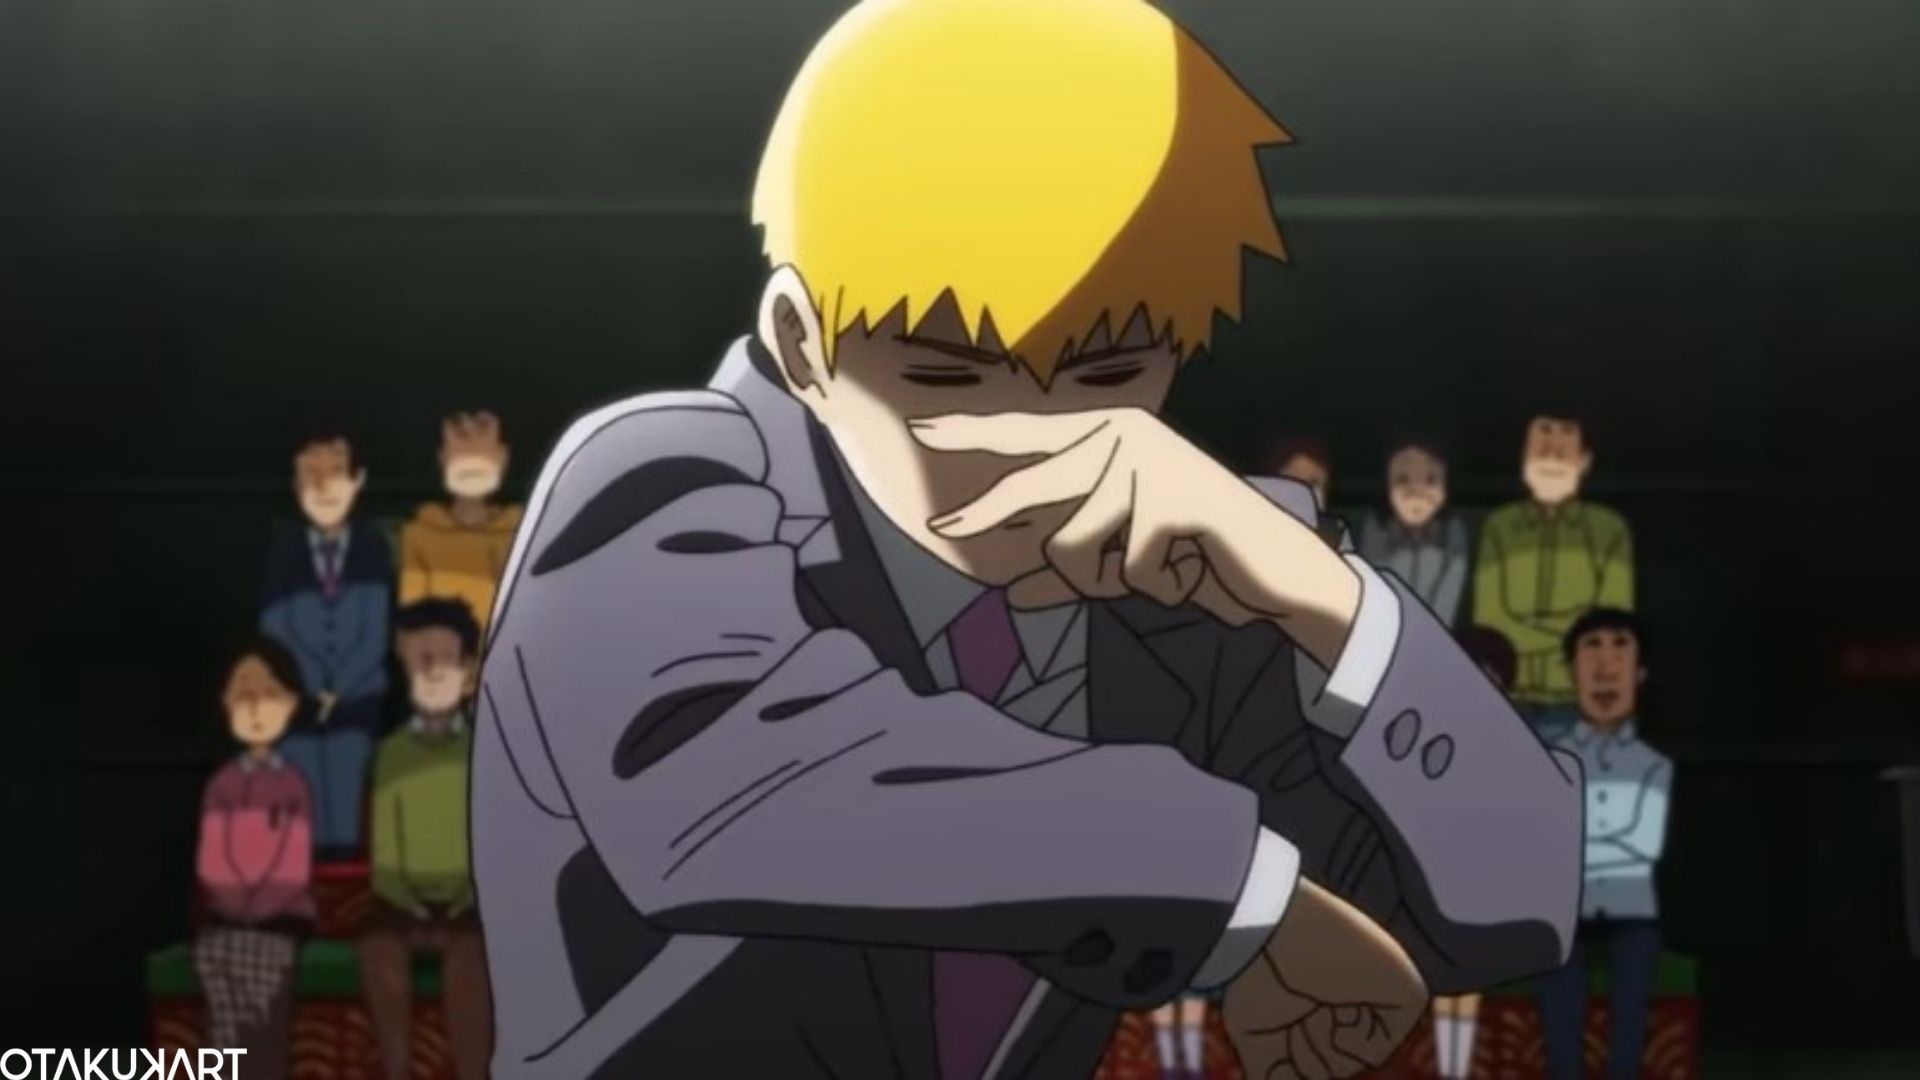 Best Quotes by Reigen Arataka from Mob Psycho 100